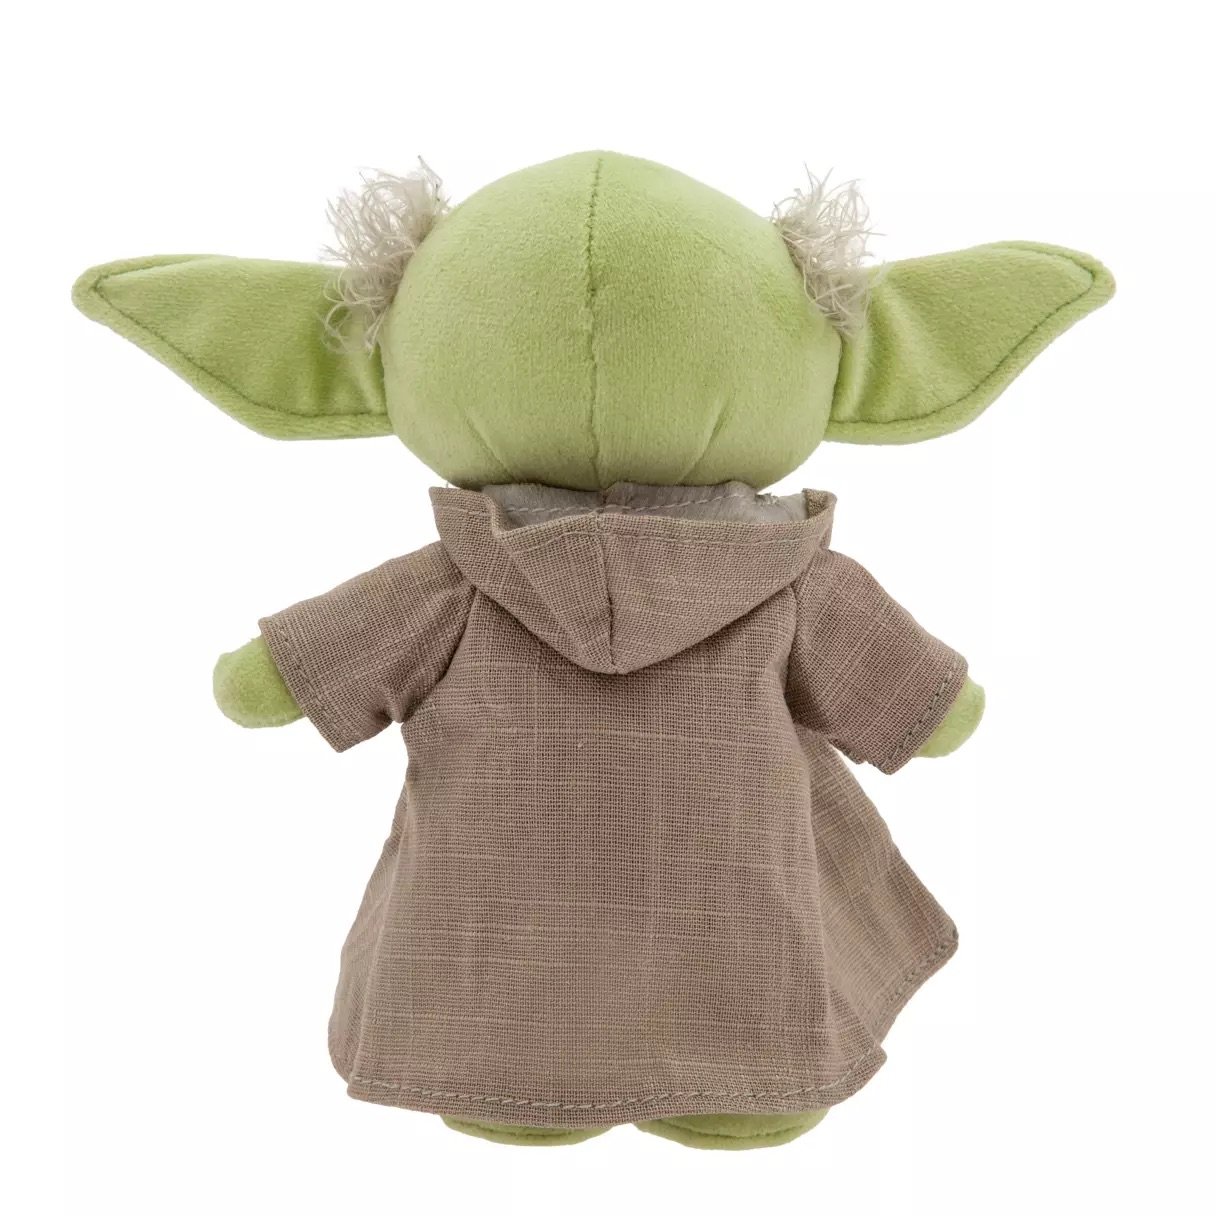 Star Wars Disney nuiMOs Collection on shopDisney — EXTRA MAGIC MINUTES